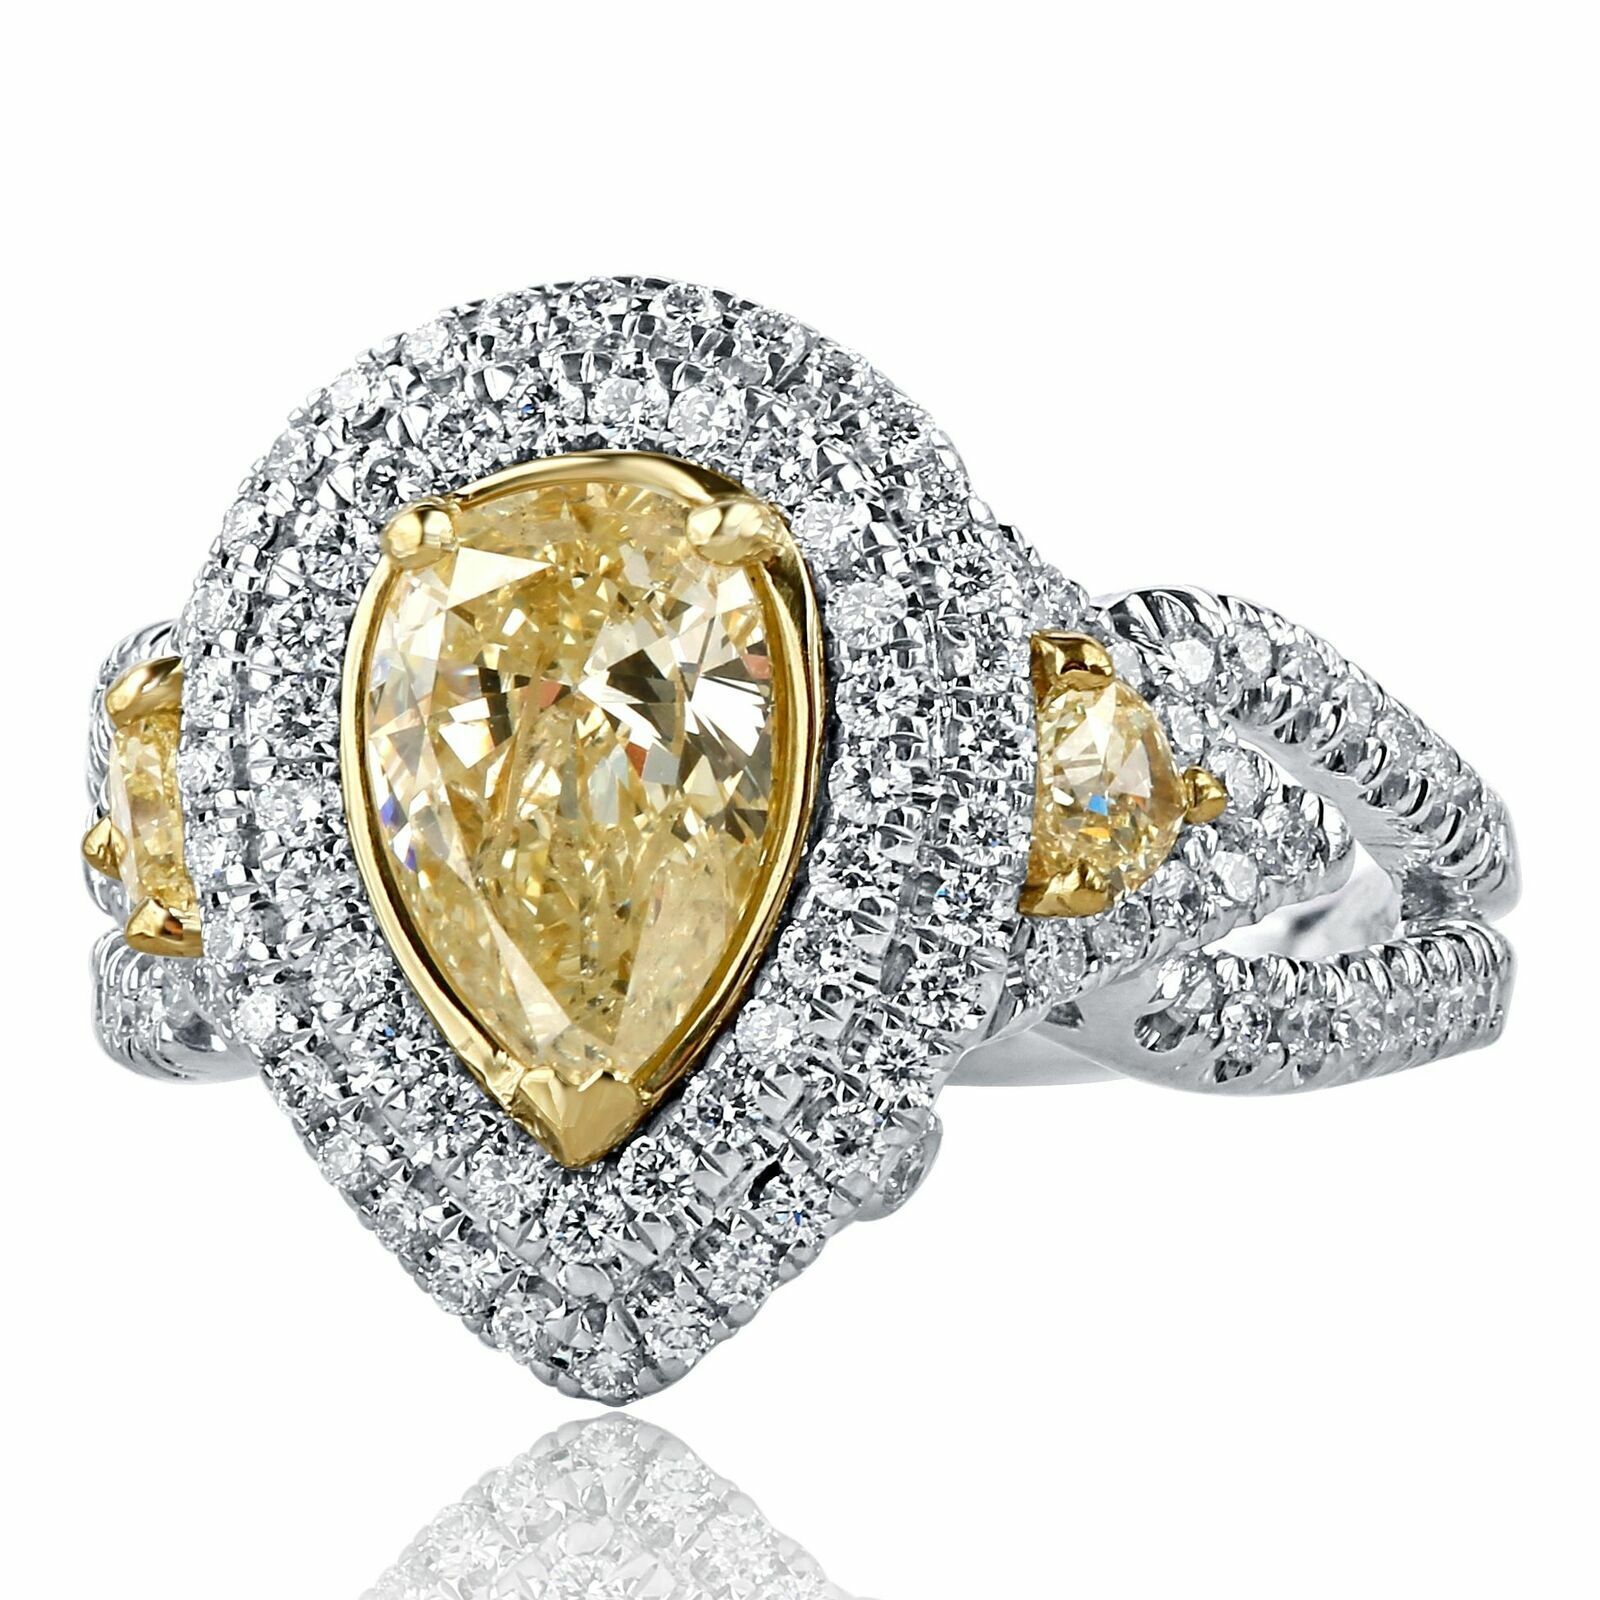 Primary image for Art Deco Design Pear Cut 2.06ct Natural Faint Yellow Diamond Ring 14k White Gold